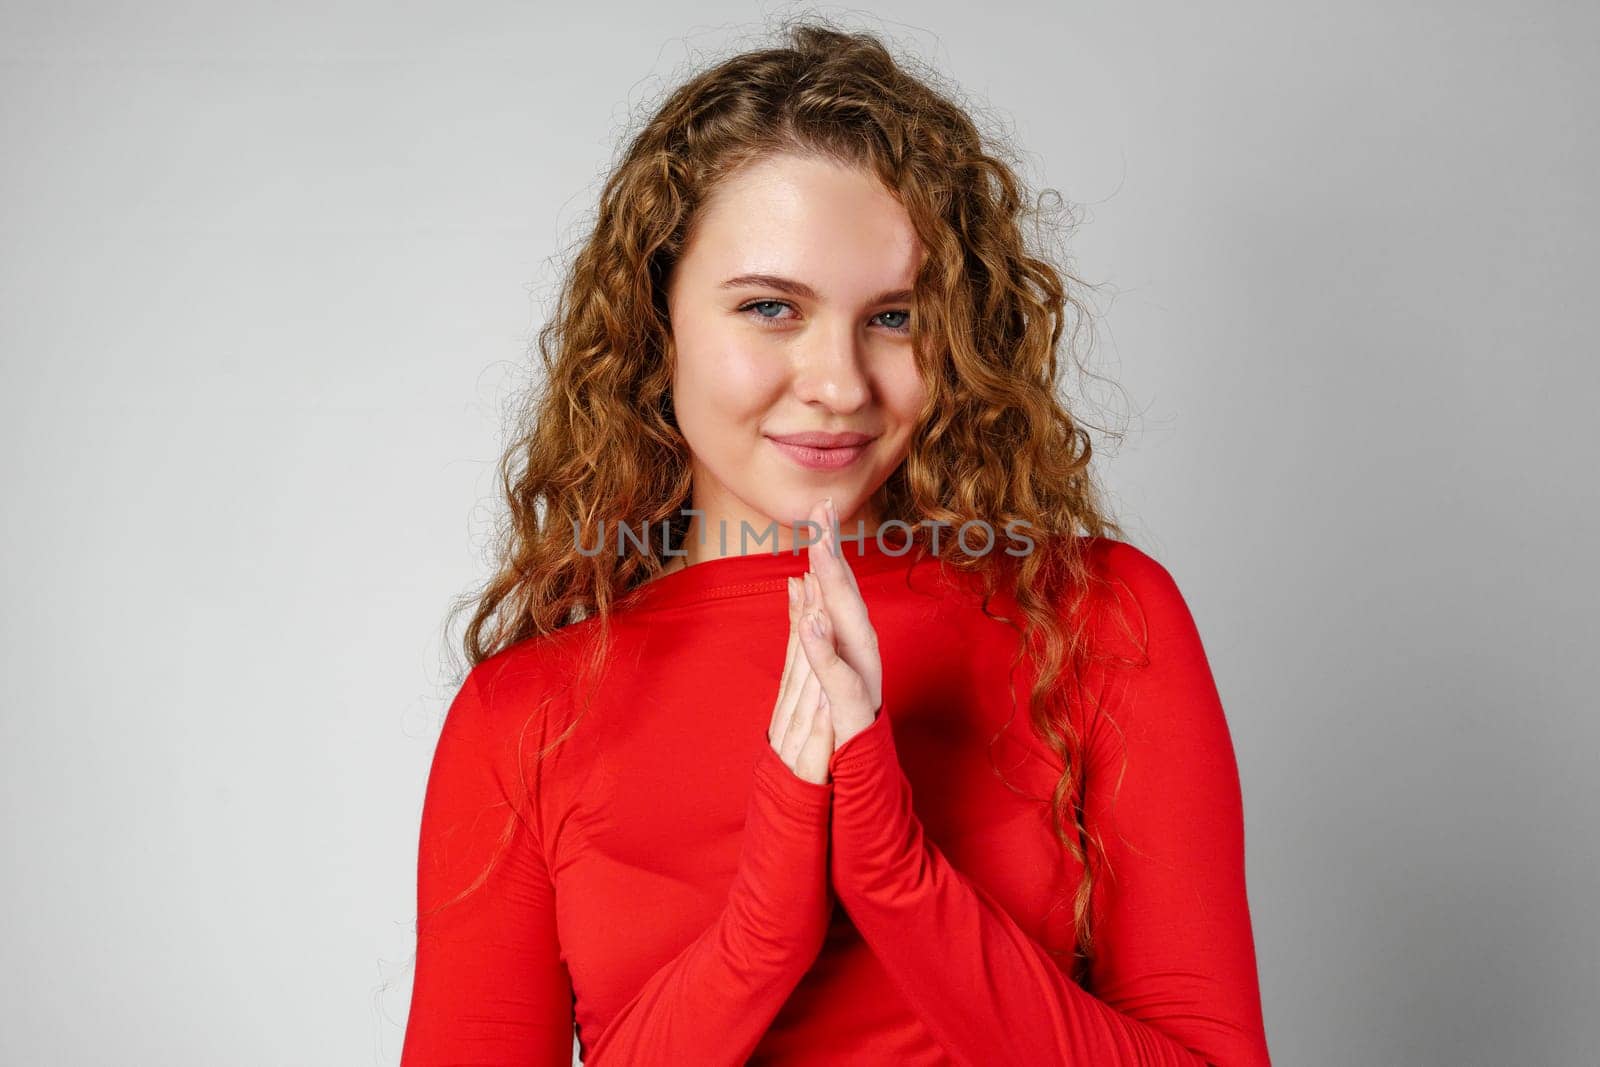 Young Woman With Curly Hair Portrait against gray background in studio